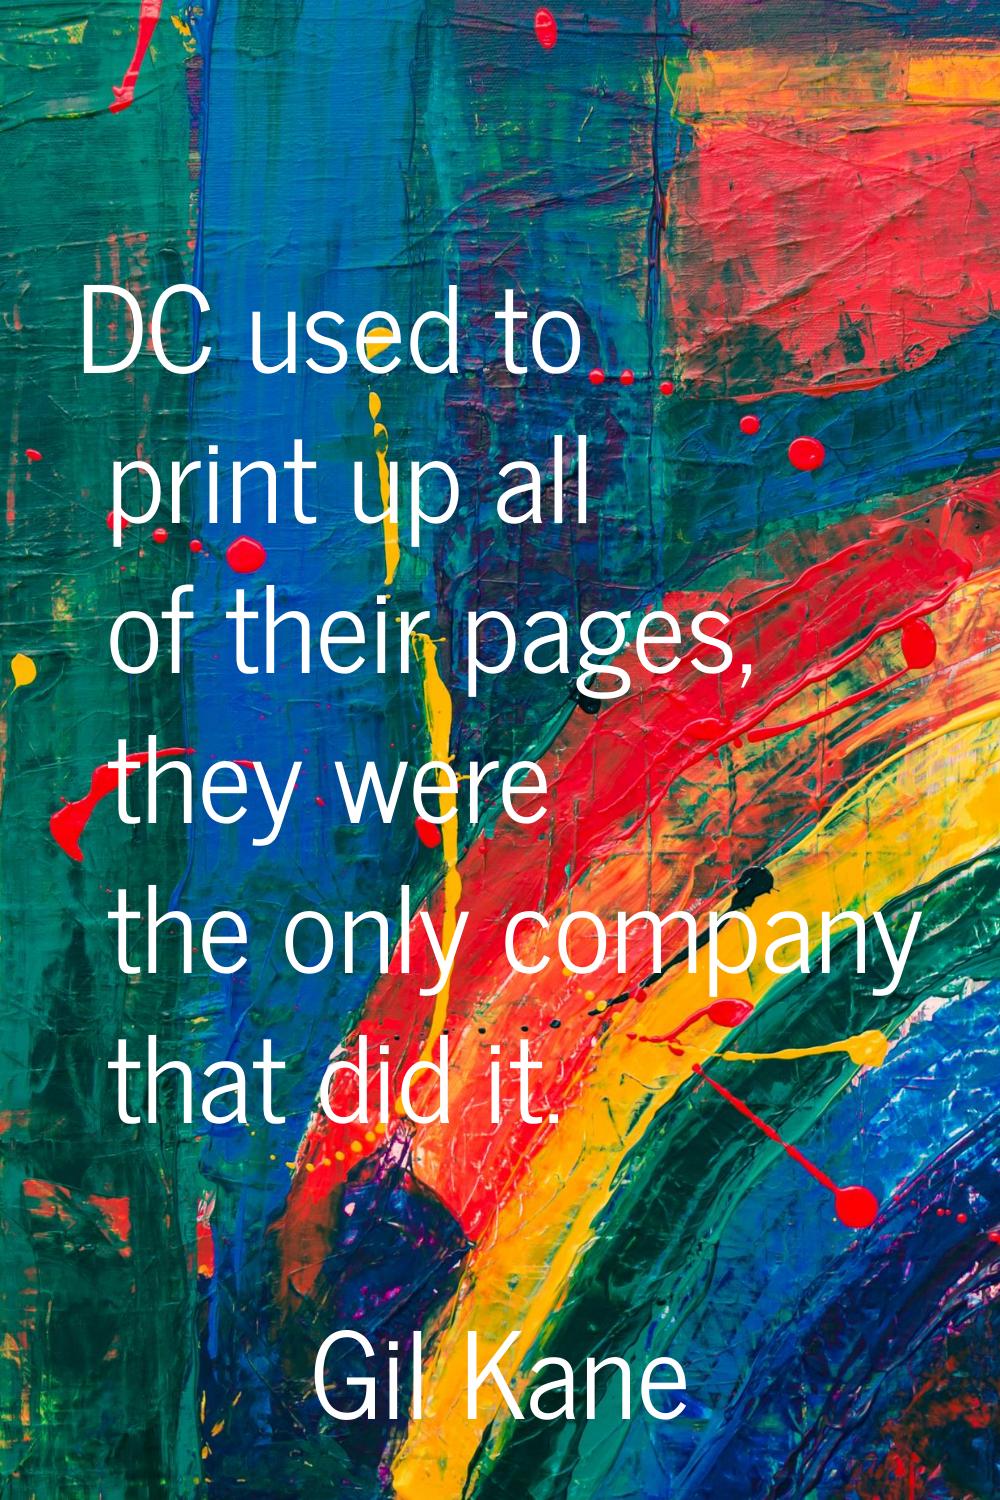 DC used to print up all of their pages, they were the only company that did it.